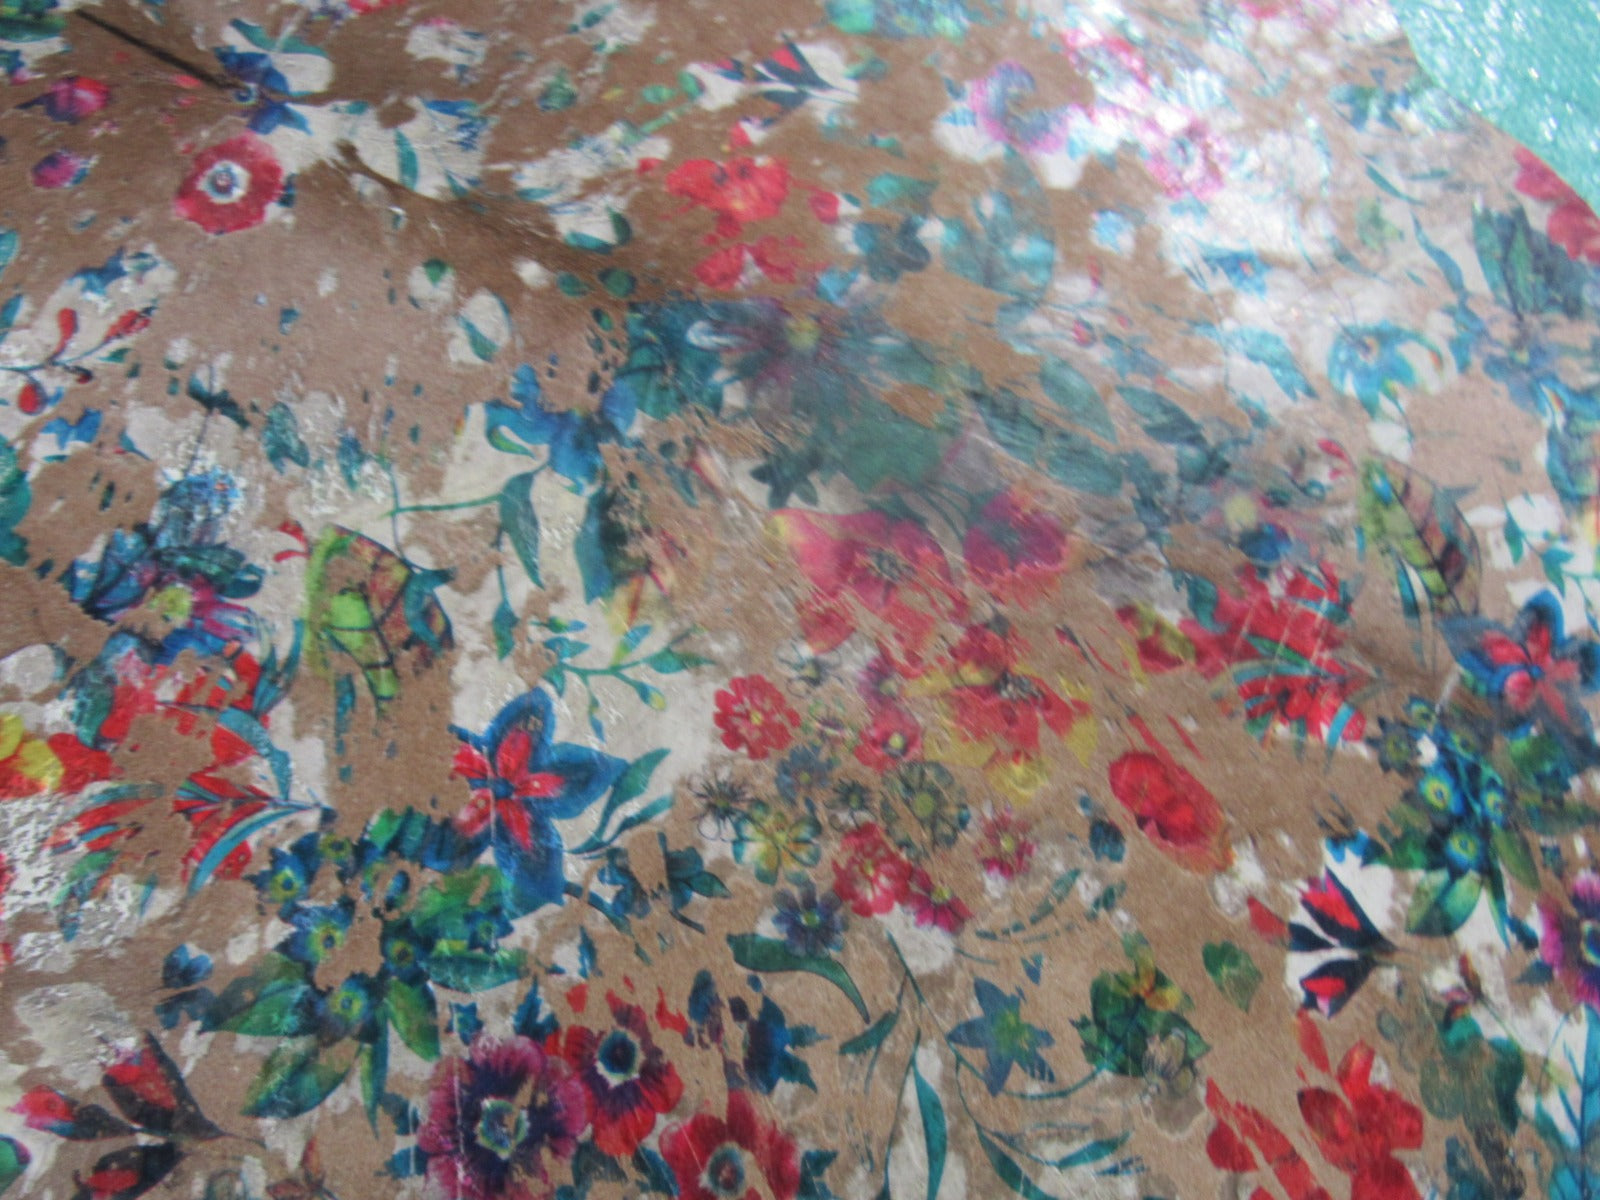 Floral Acid Washed Calf Skin Rug (very little hair) Size: 37x27" C-1619